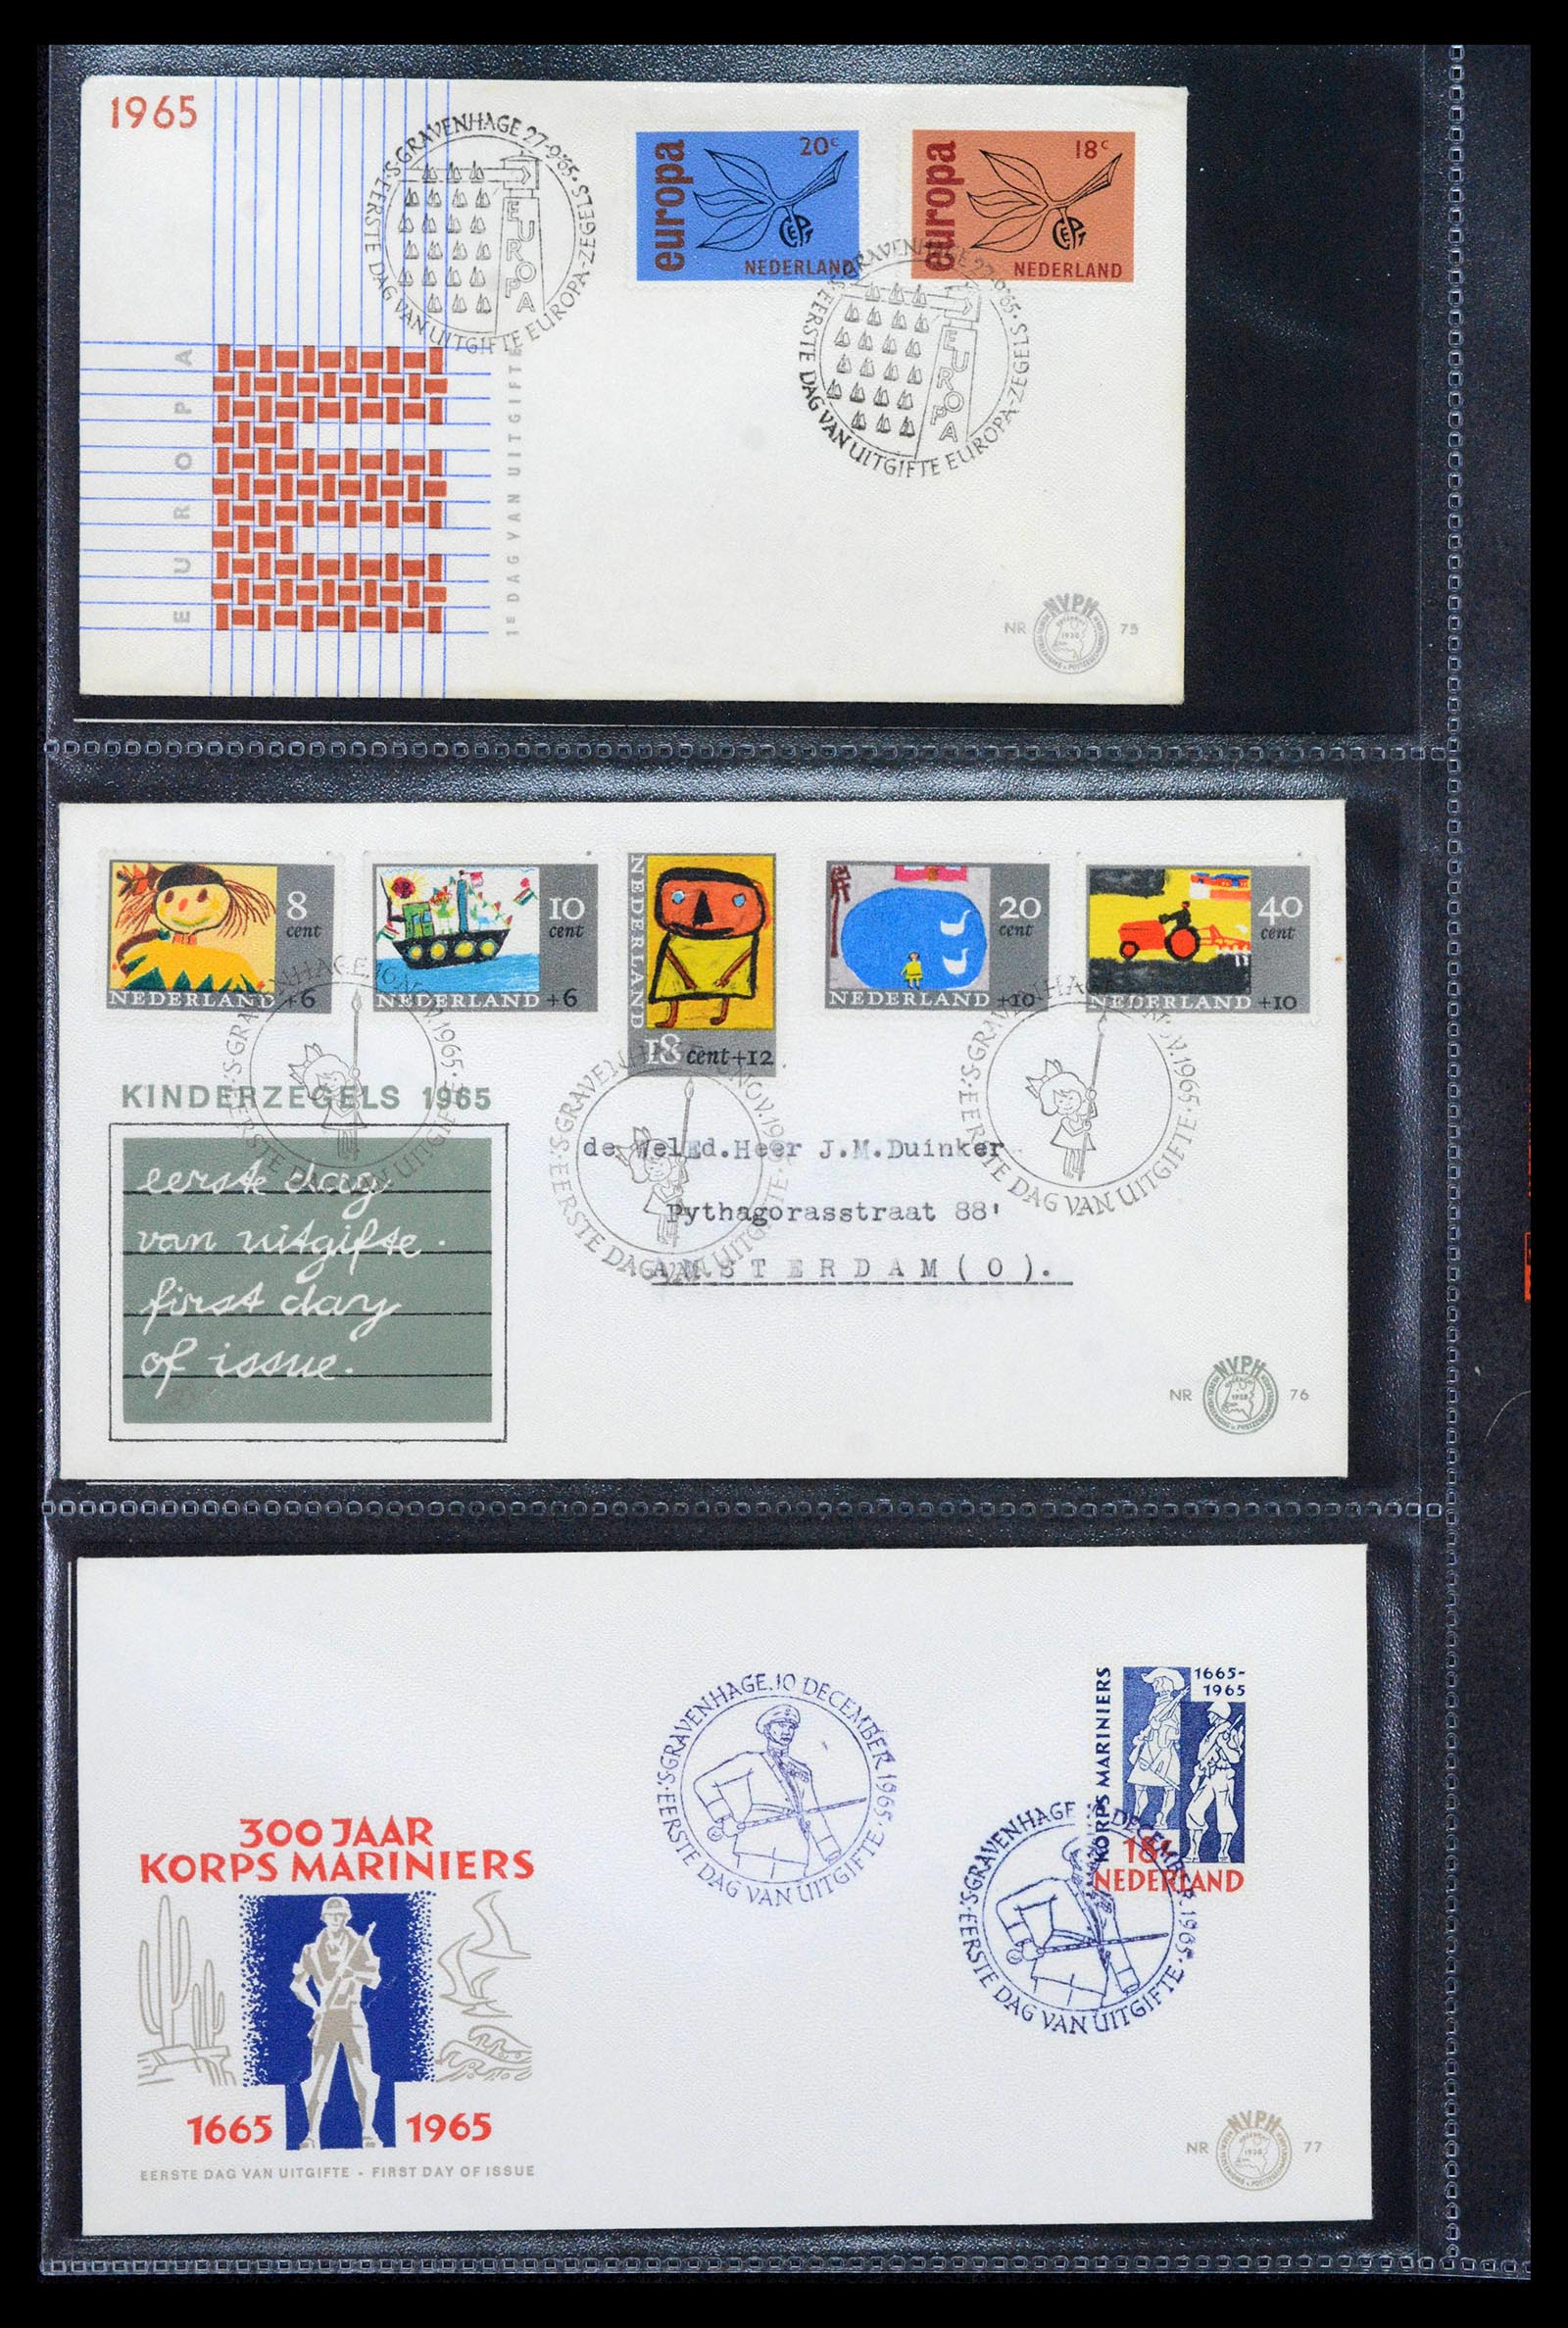 39041 0026 - Stamp collection 39041 Netherlands first day covers 1950-1977.